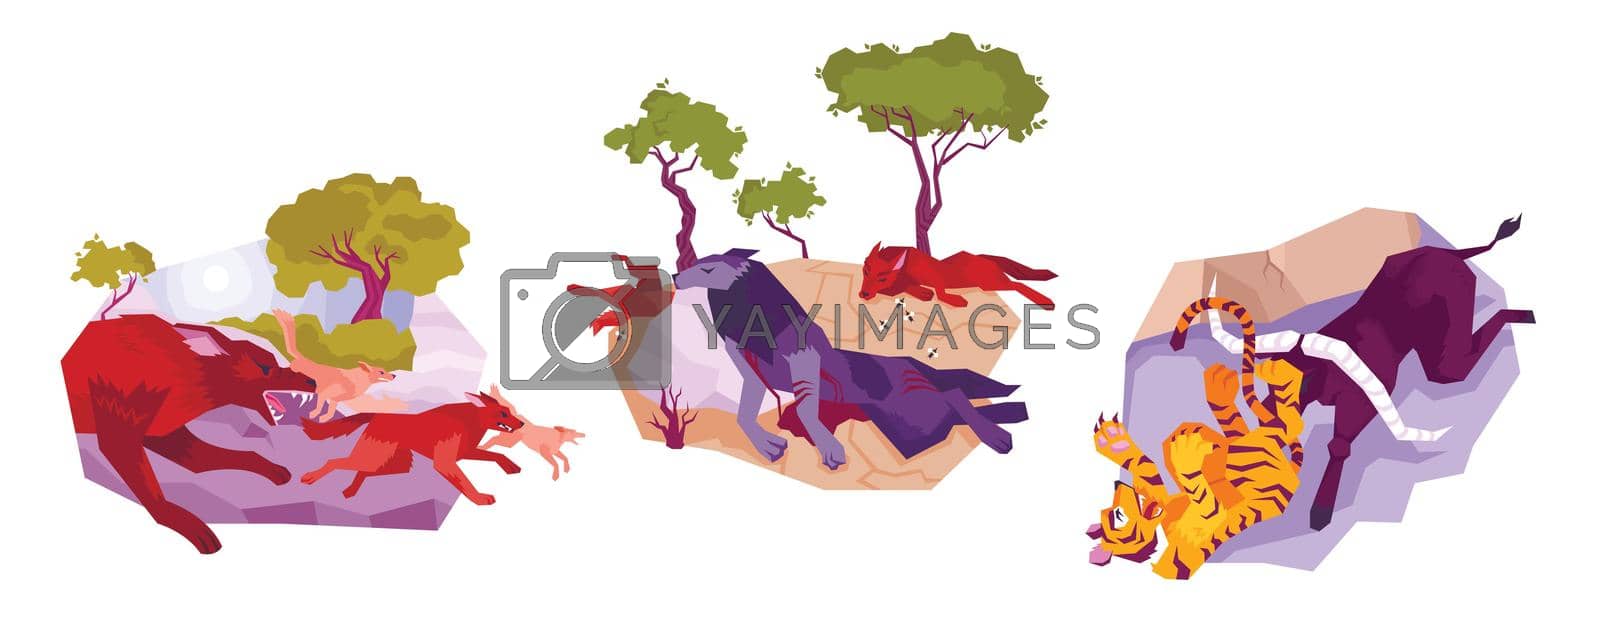 Three animals icon set with running wolves defeated wolves and a tiger vector illustration